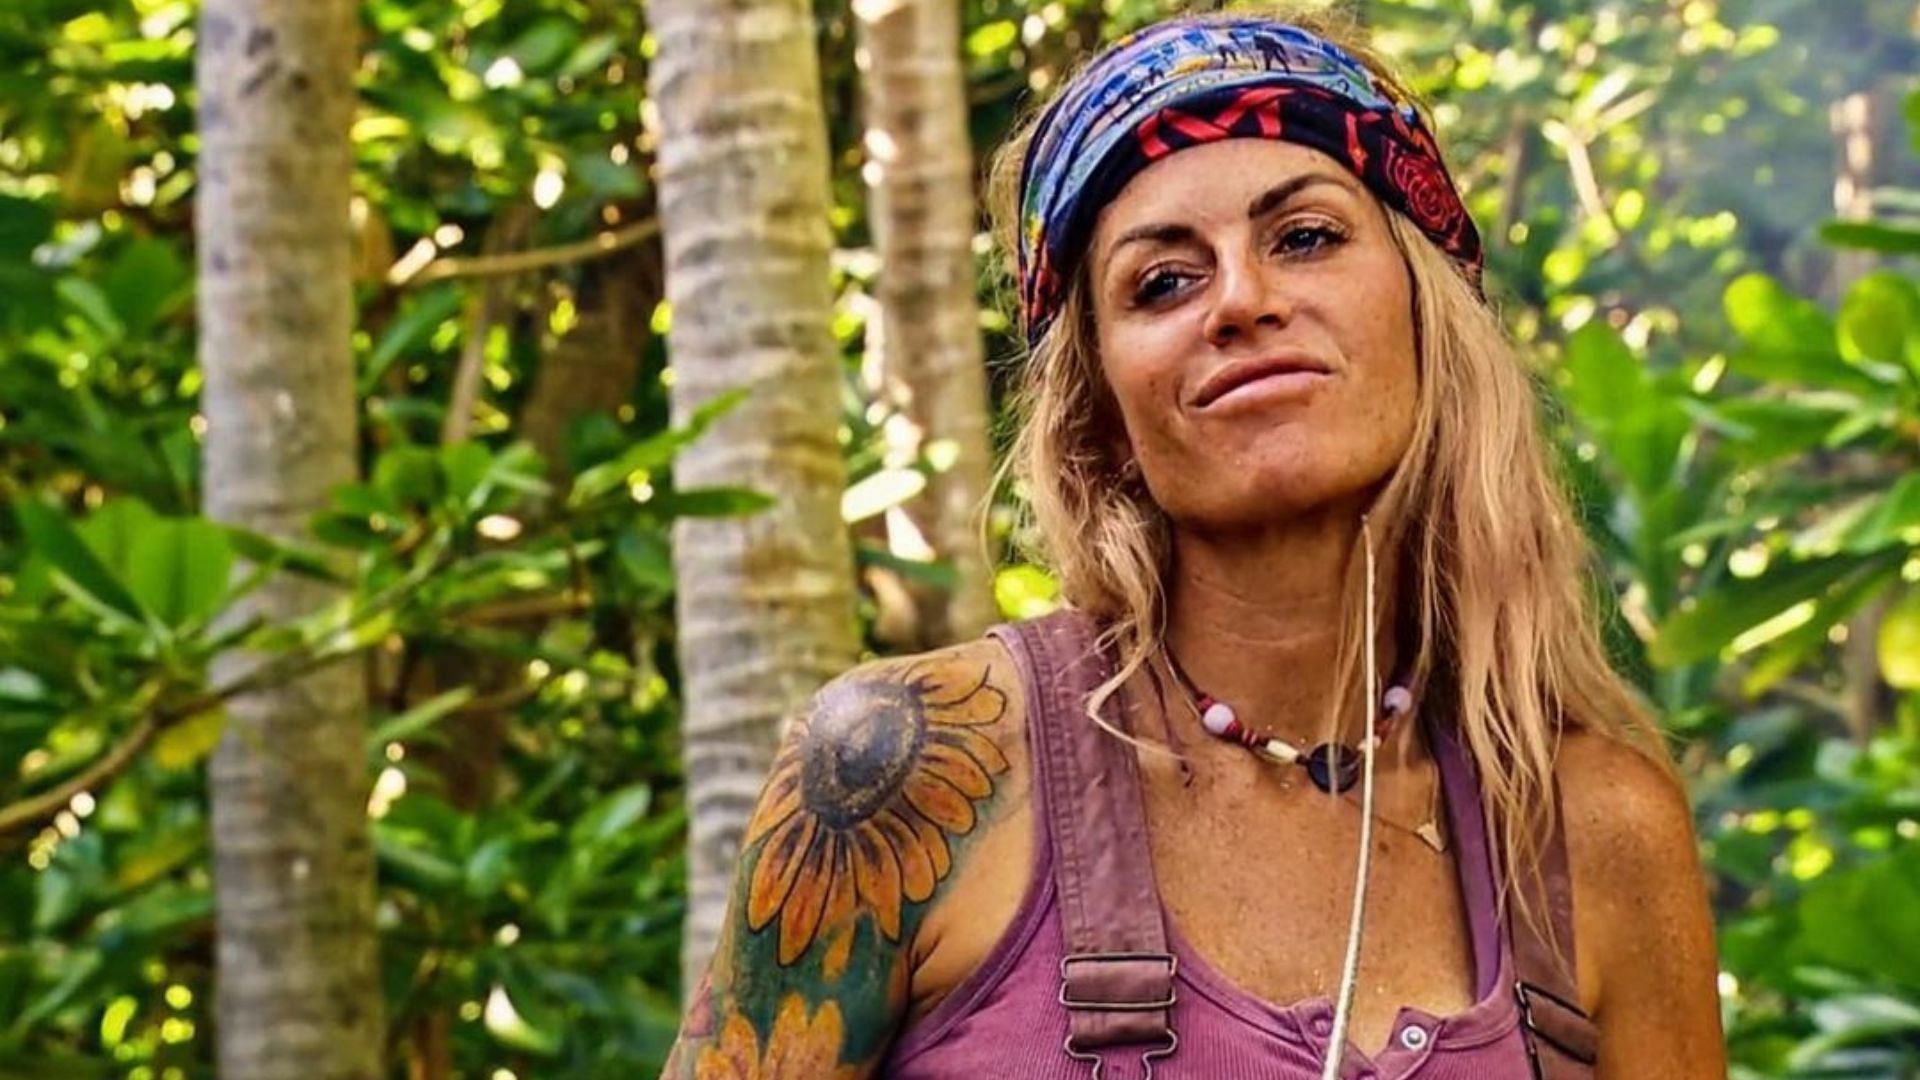 "Put some respect on Carolyn's name" Survivor fans applaud Carolyn